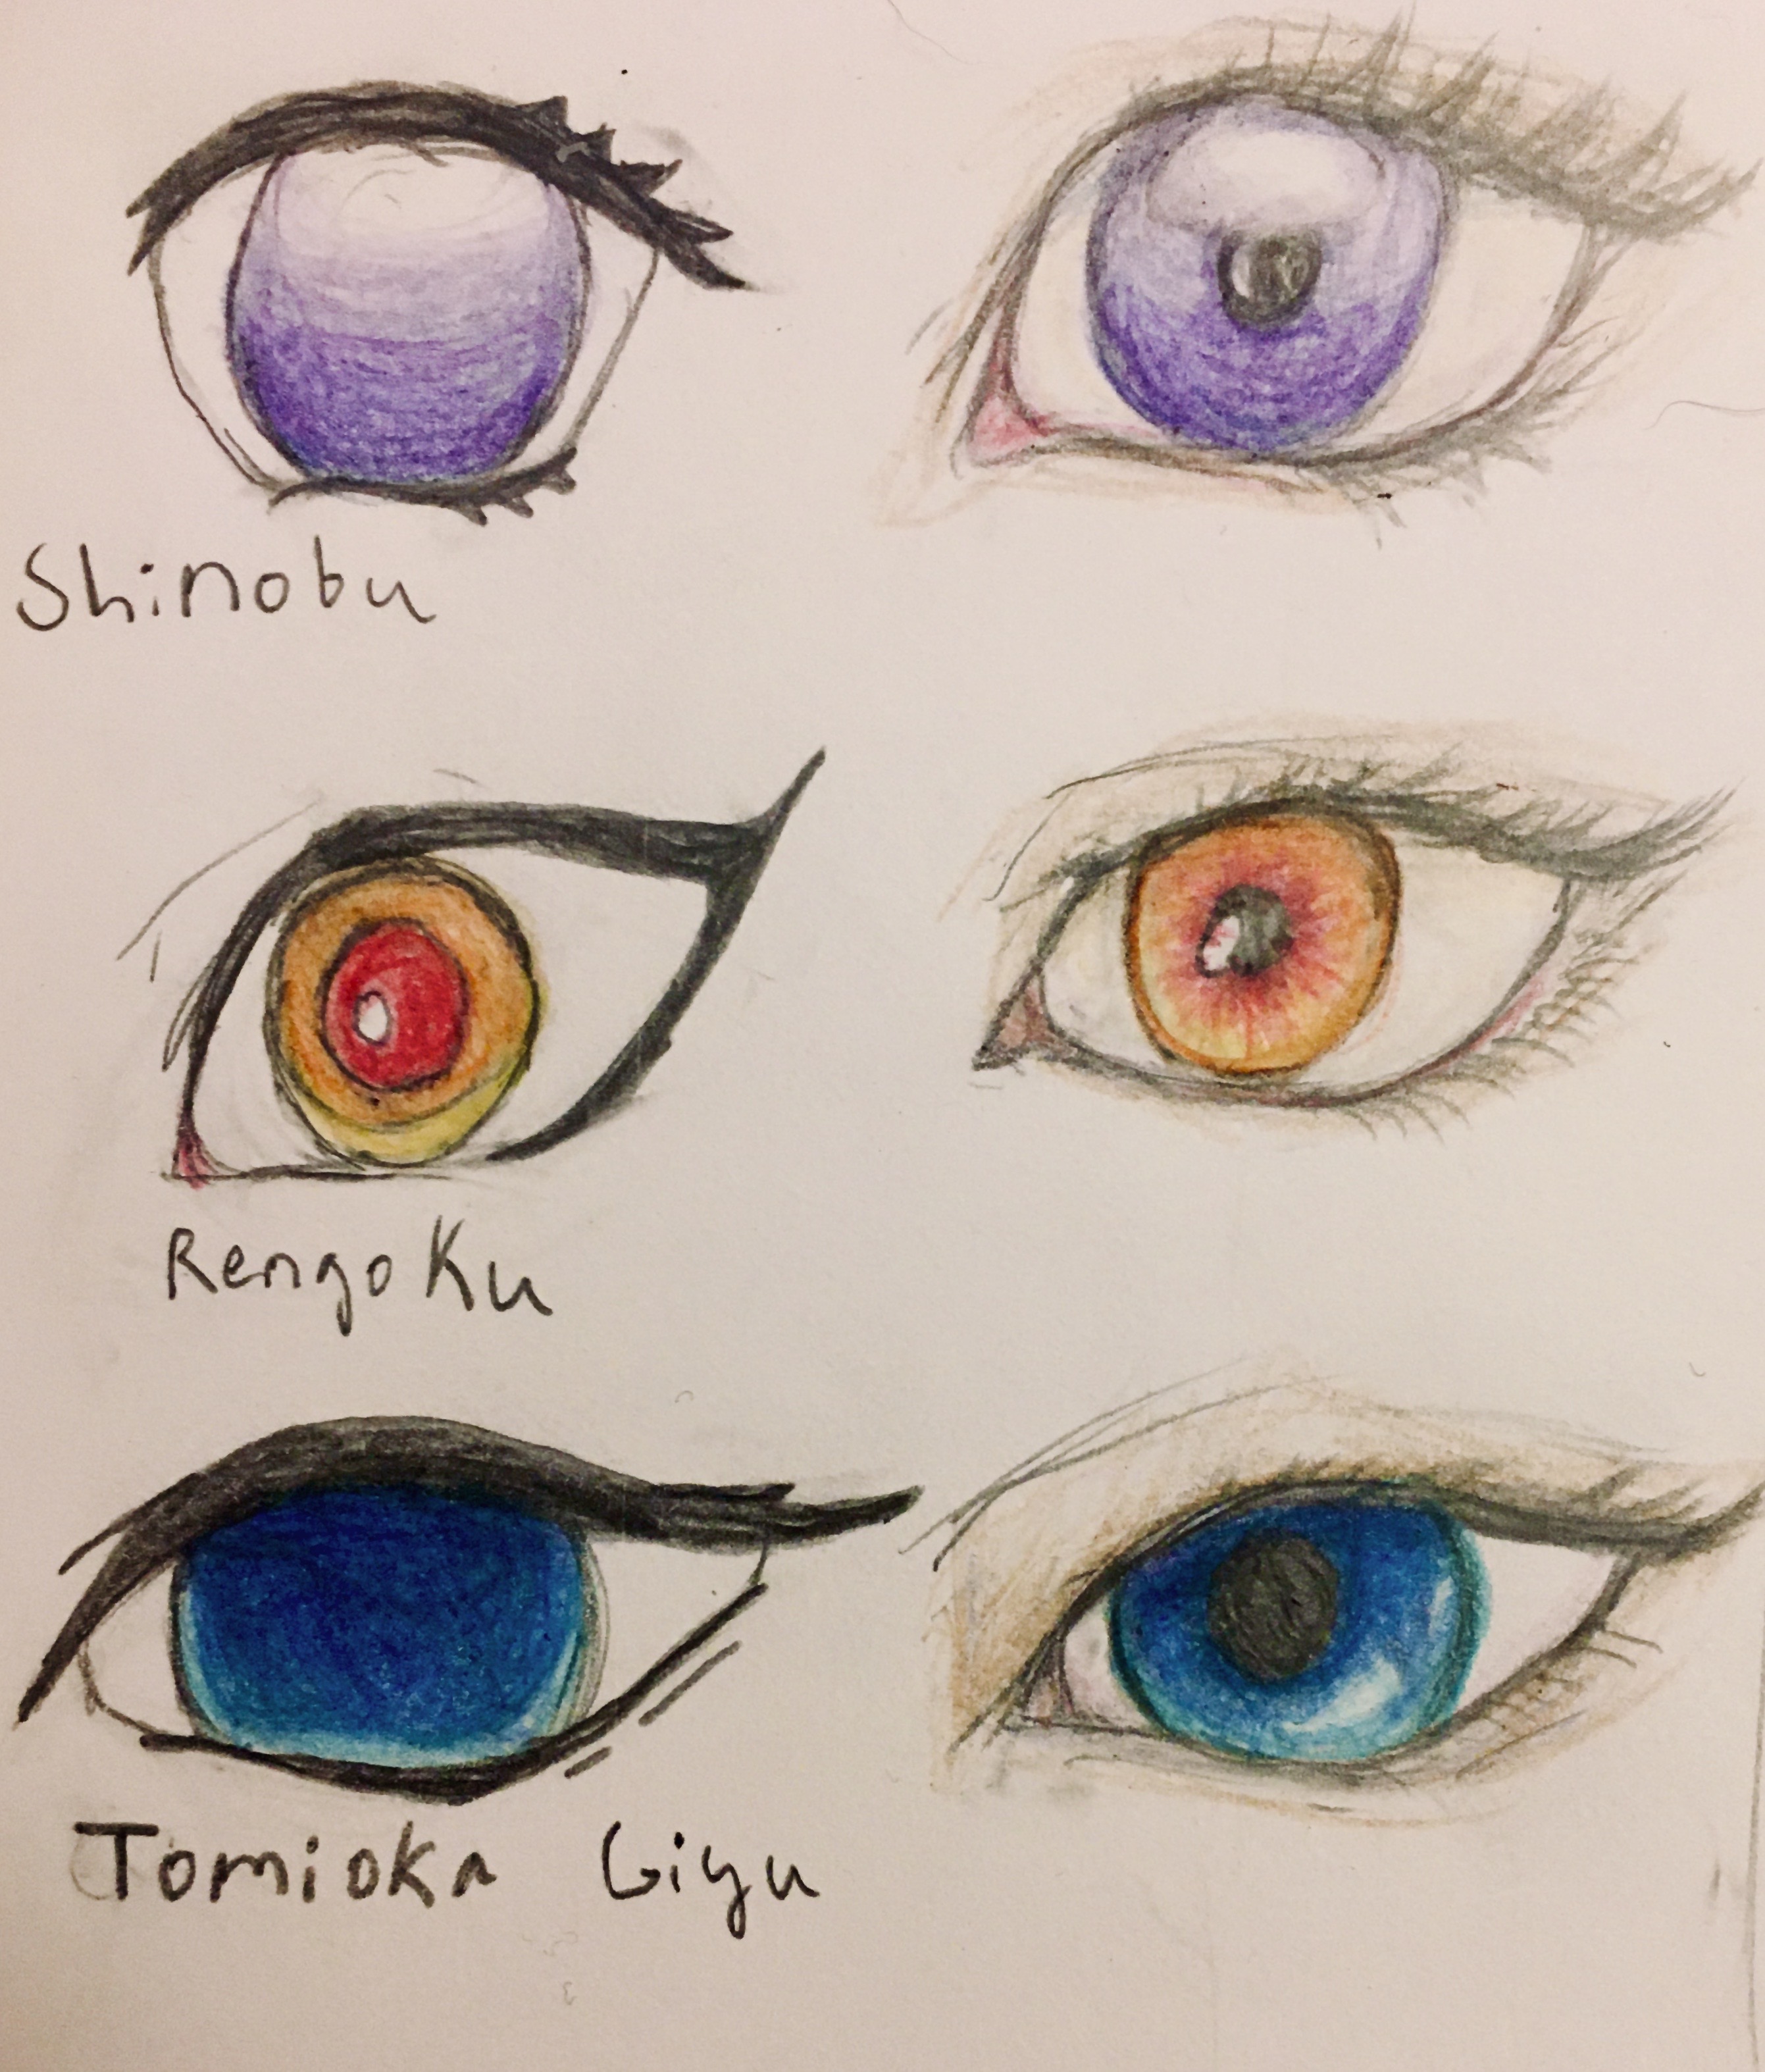 63 PAIRS OF FEMALE ANIME EYES - A Fun Project by aadisart on DeviantArt